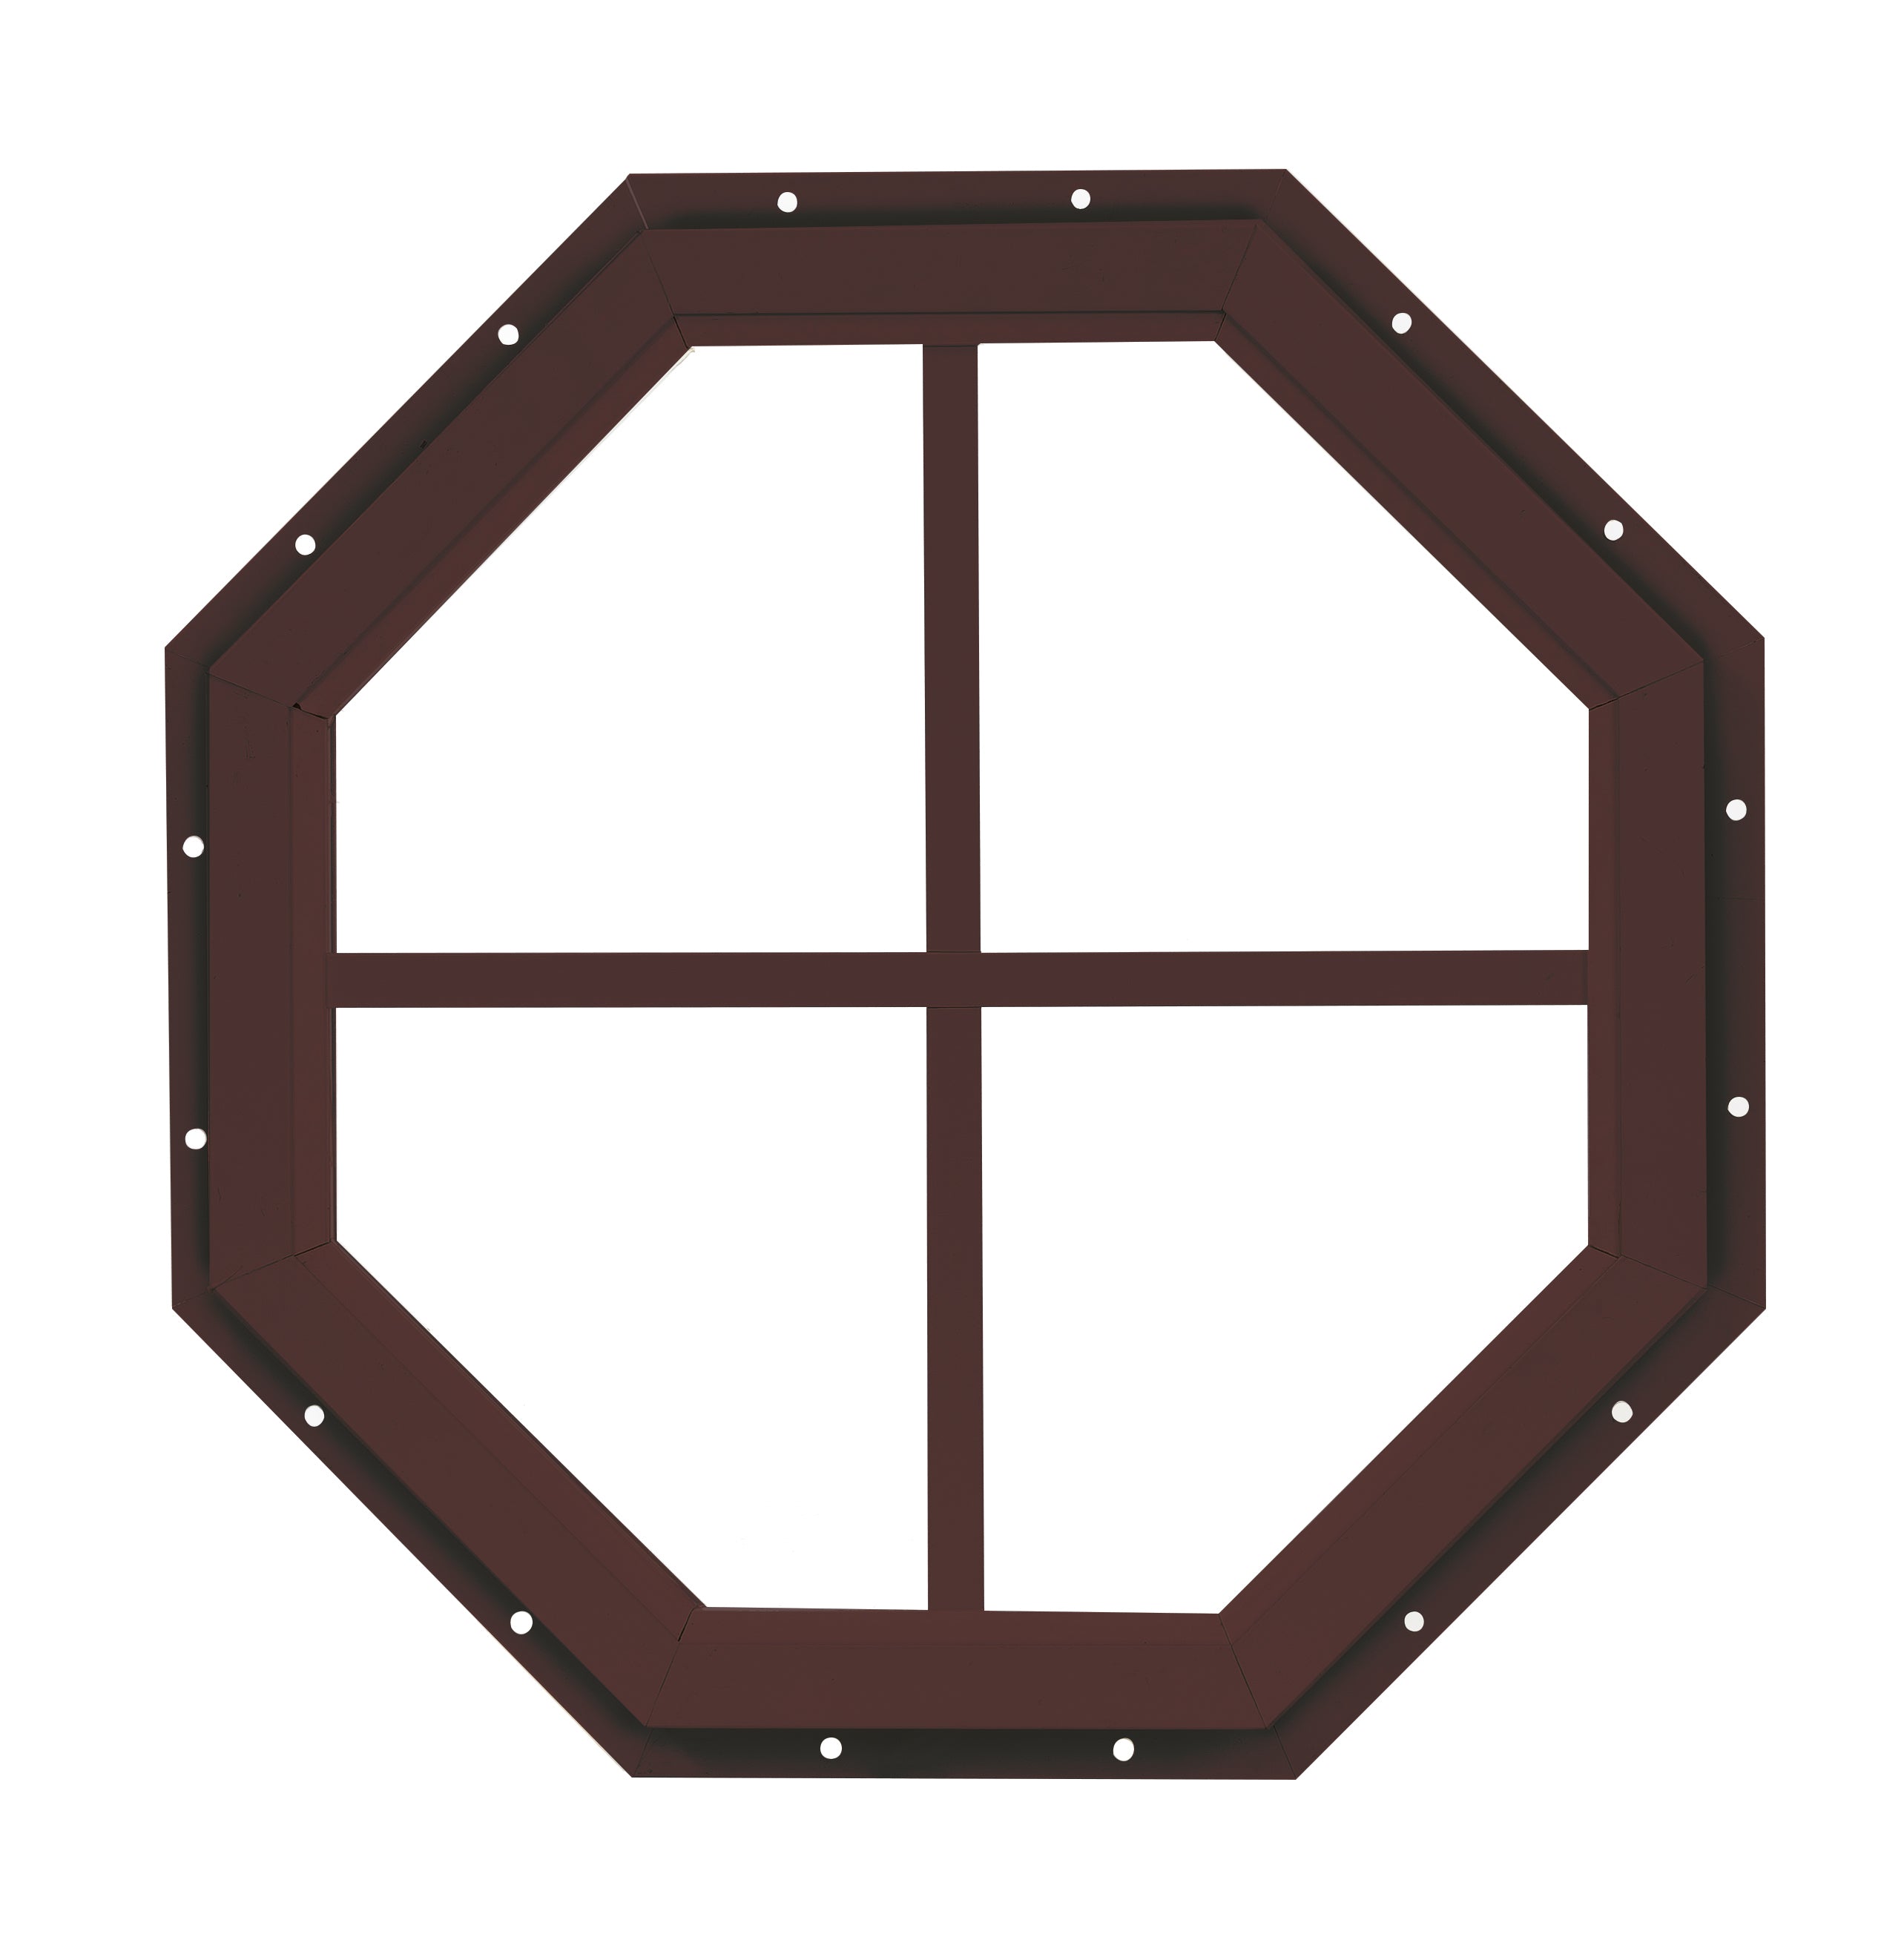 18" Octagon Gable J-Lap Mount Brown Window for Sheds, Playhouses, and MORE